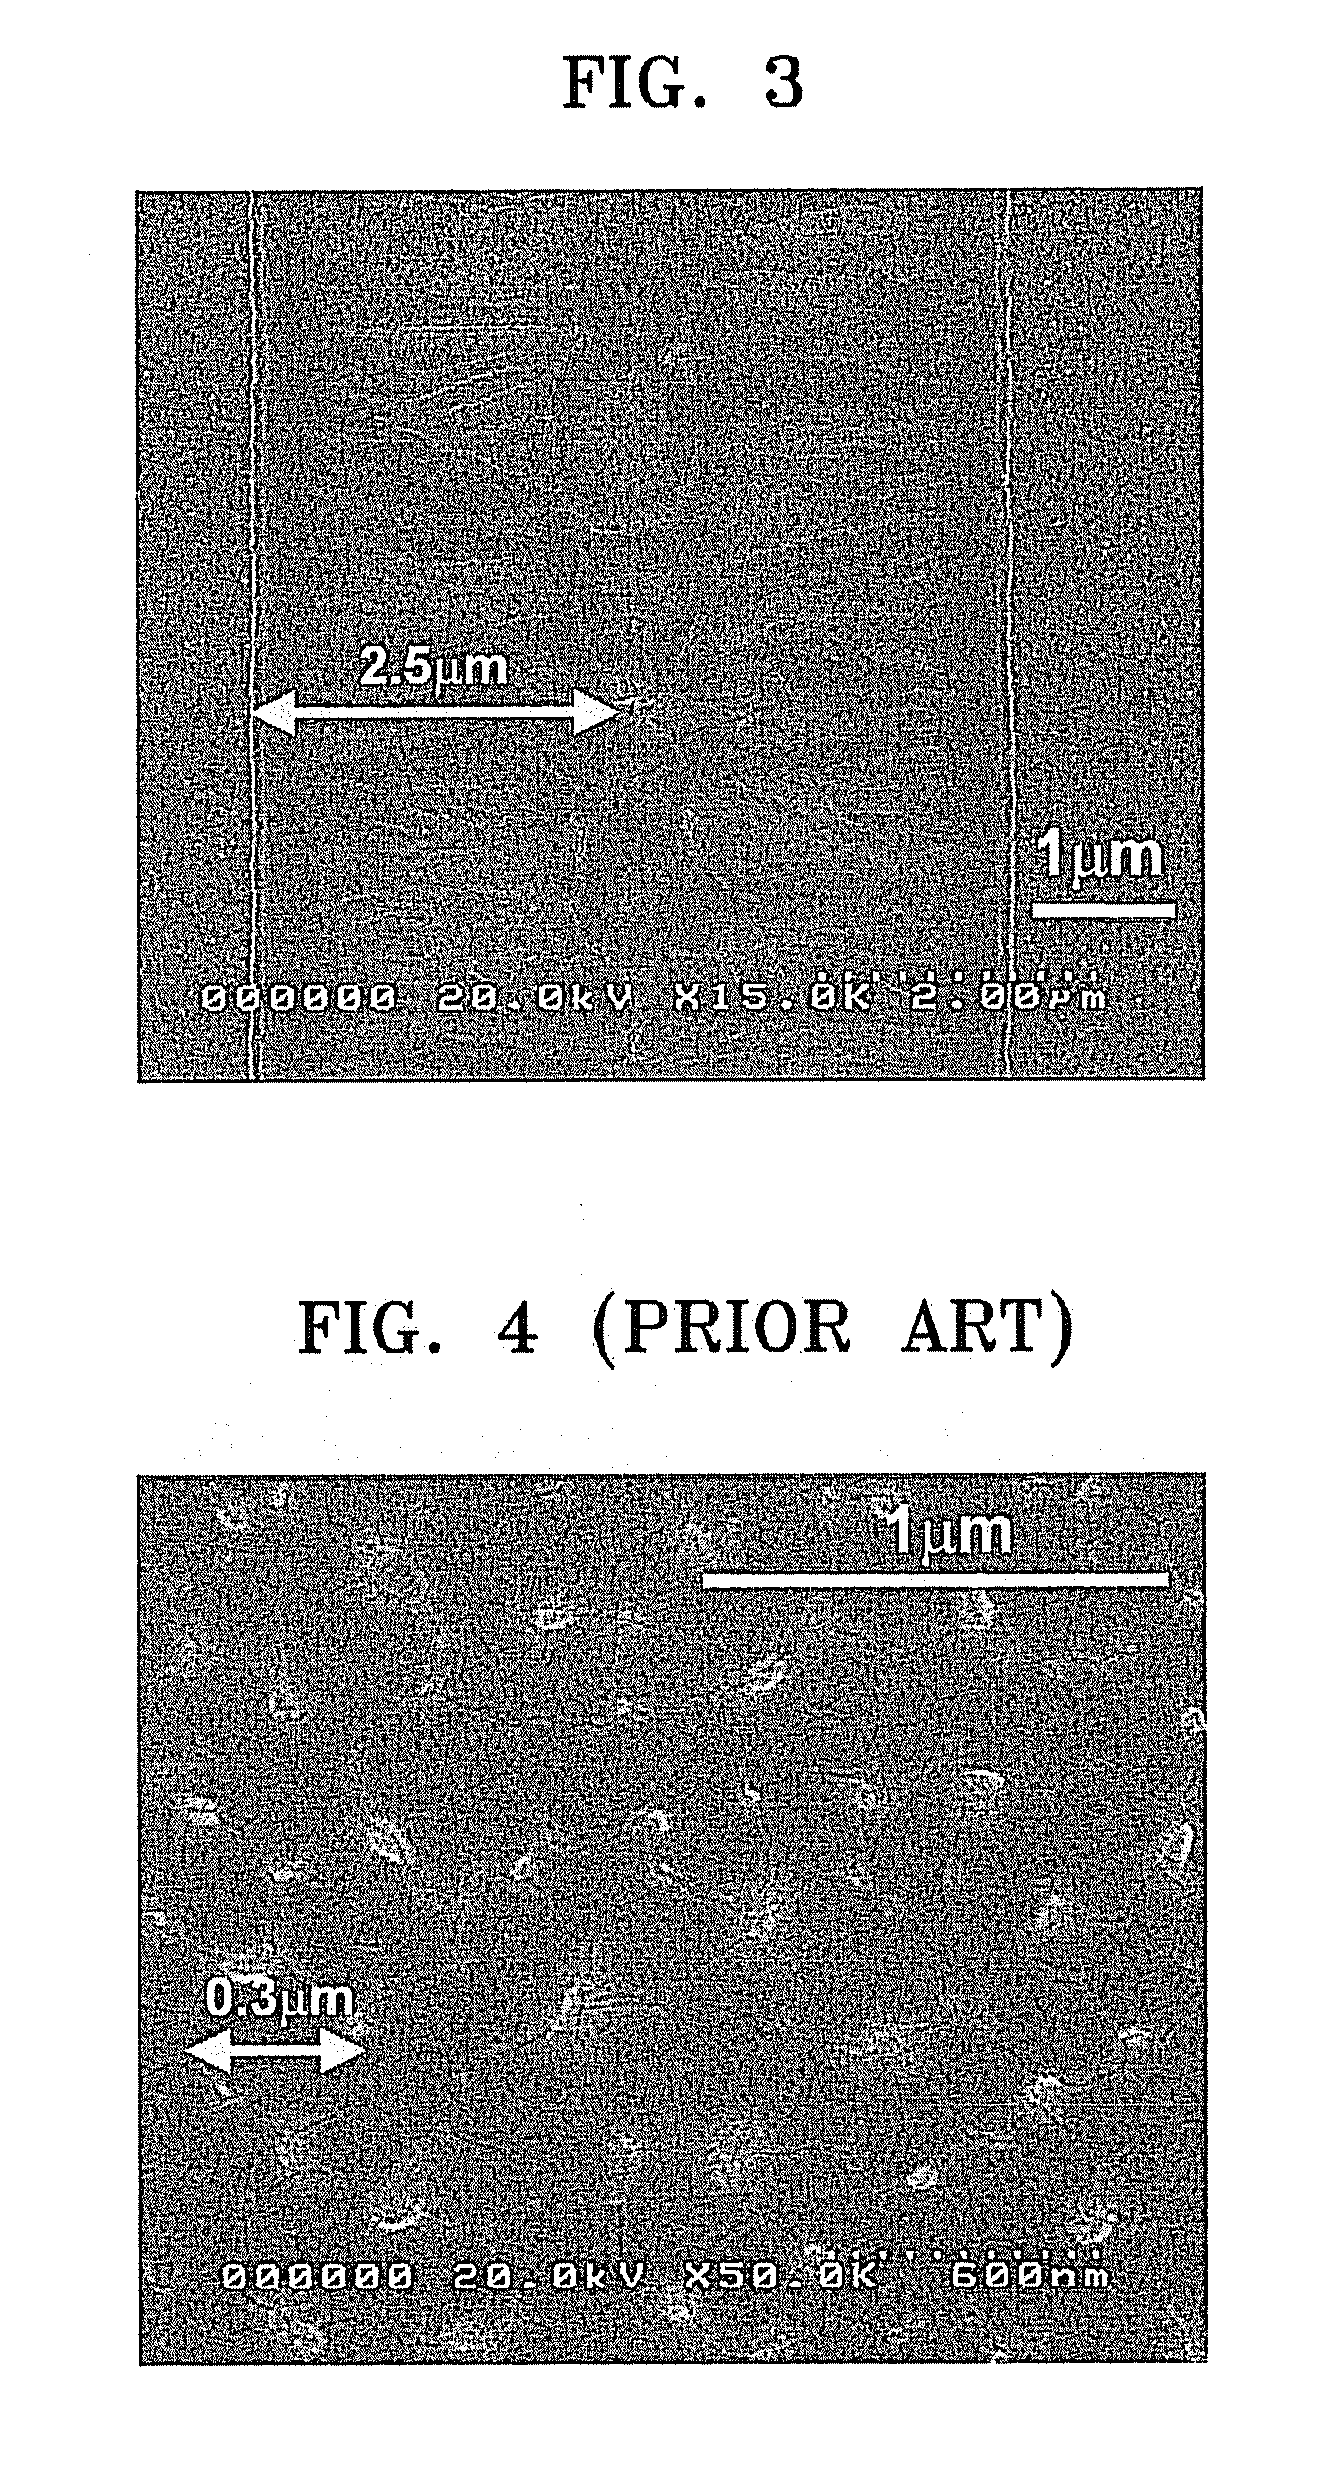 Organic electro-luminescent display and method of fabricating the same